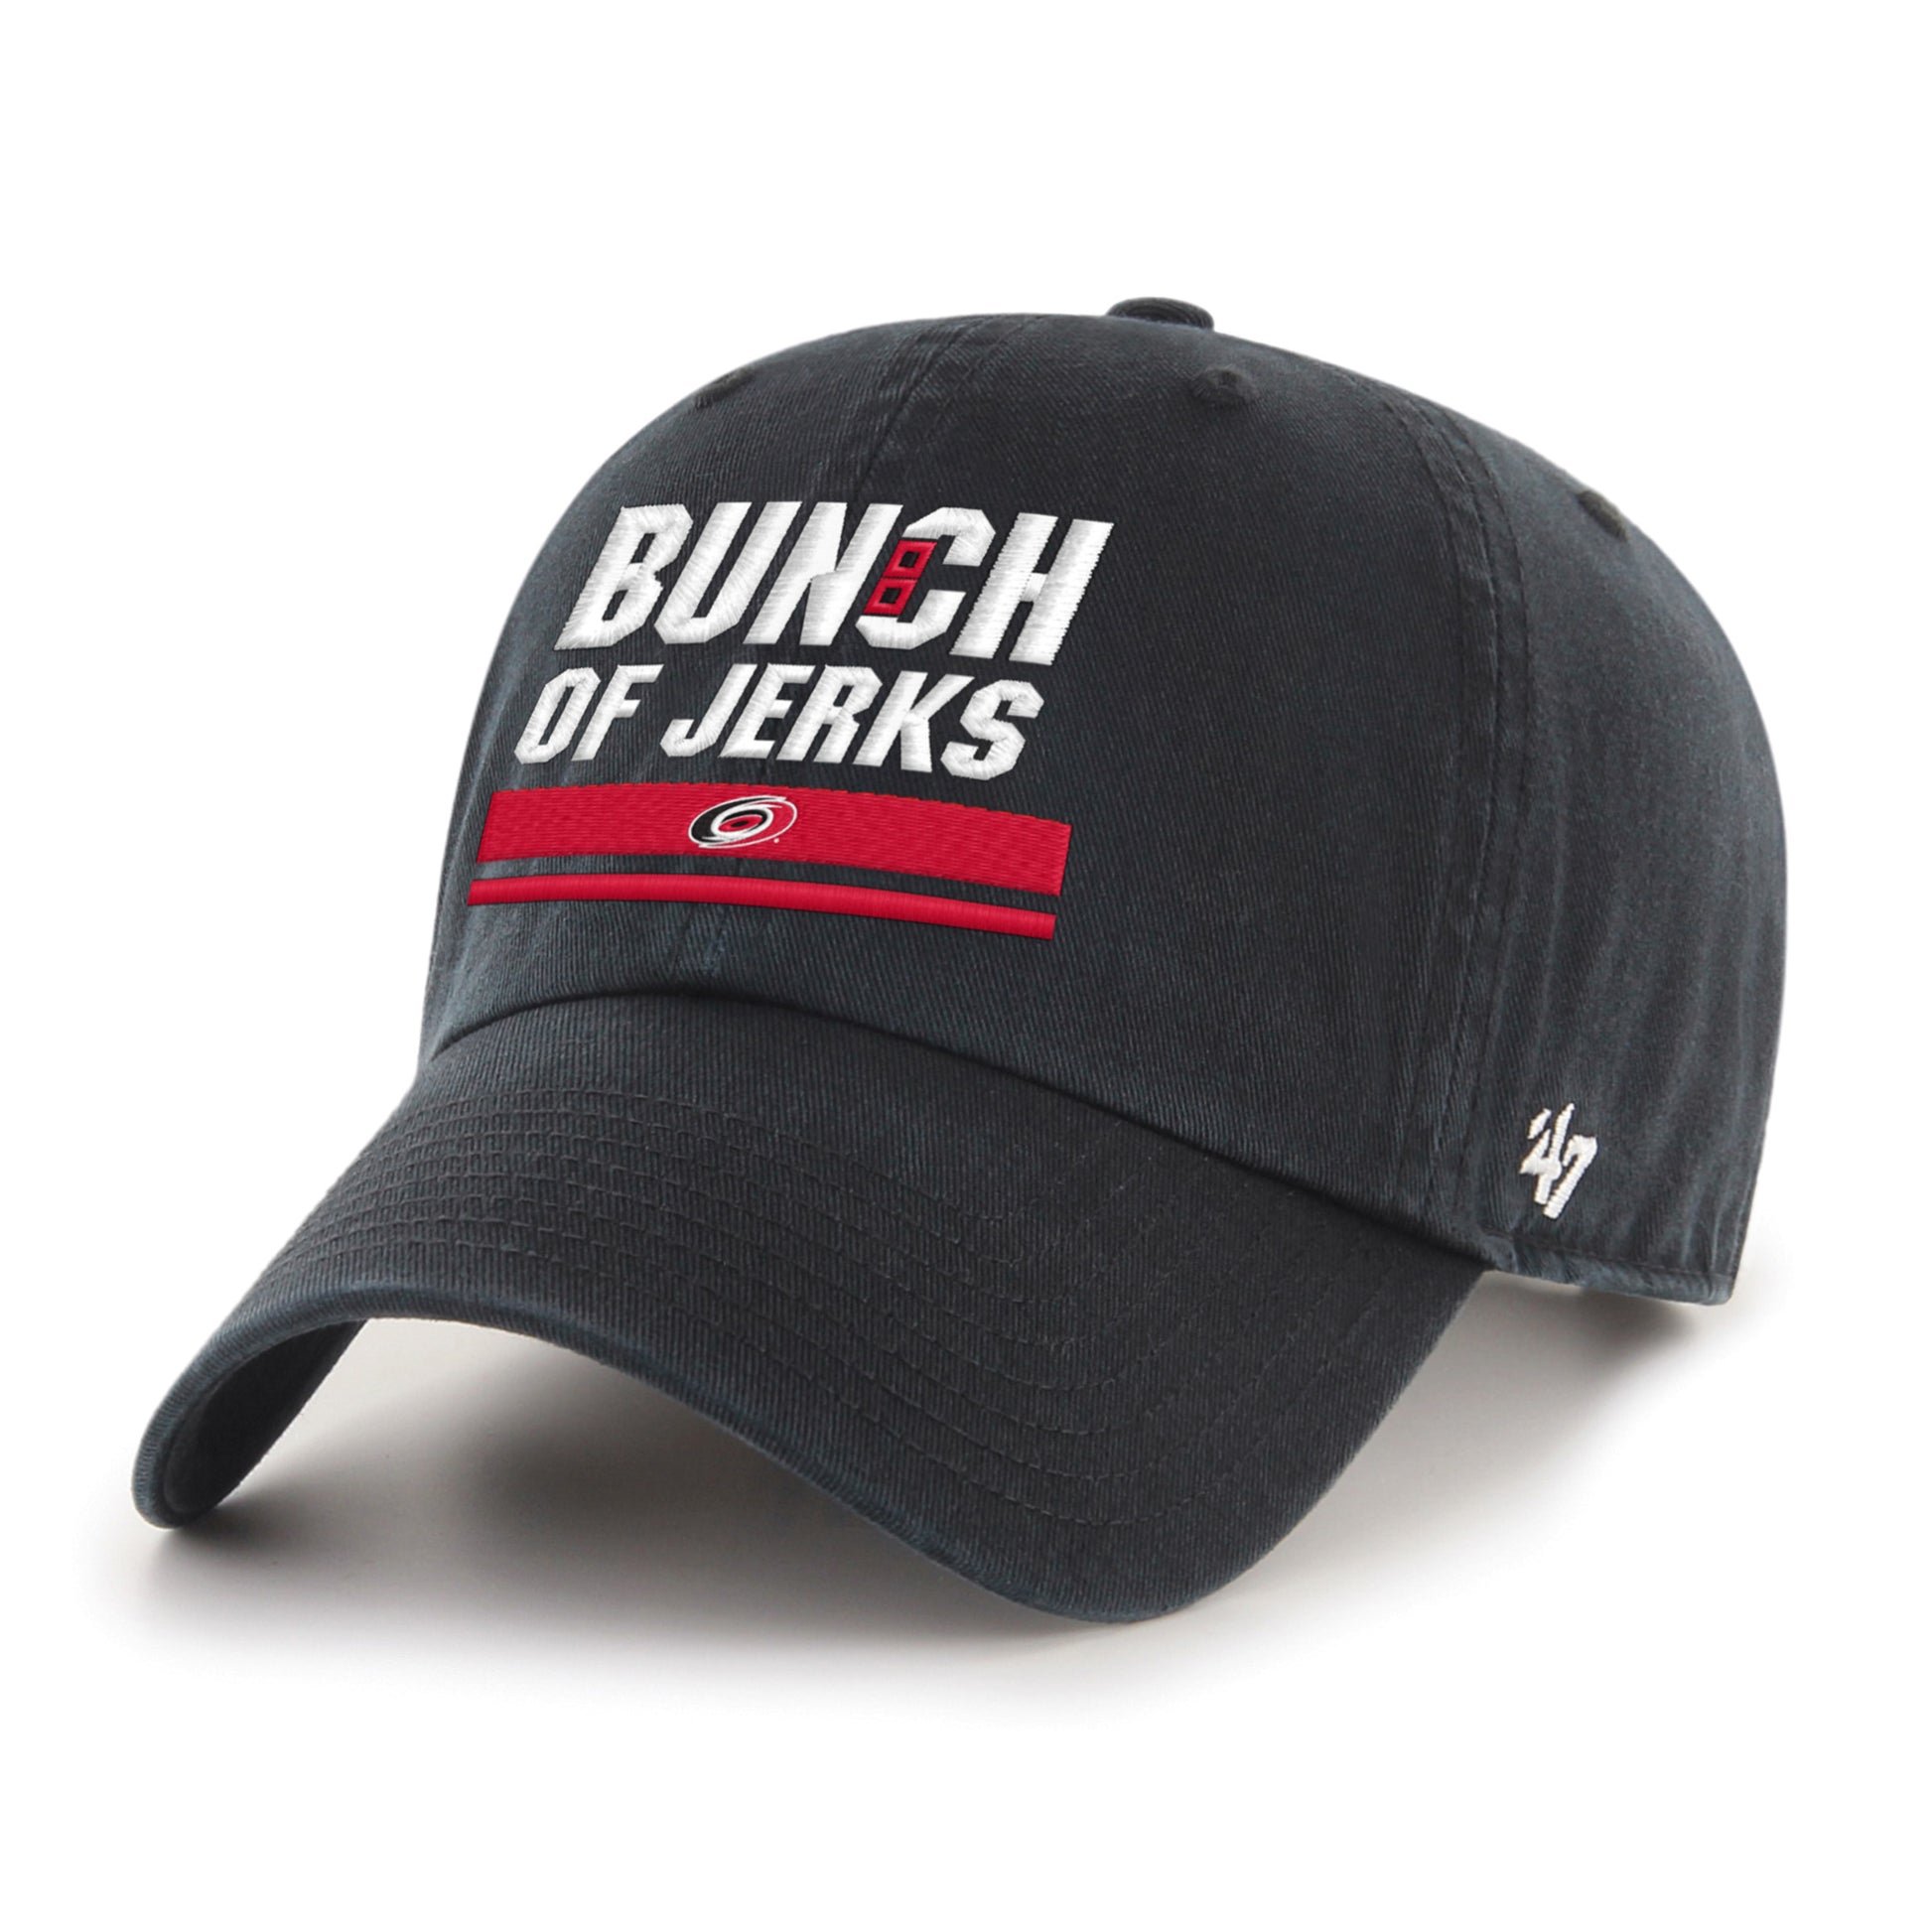 Black hat wiith Bunch of Jerks emblem on front and white 47 logo on side